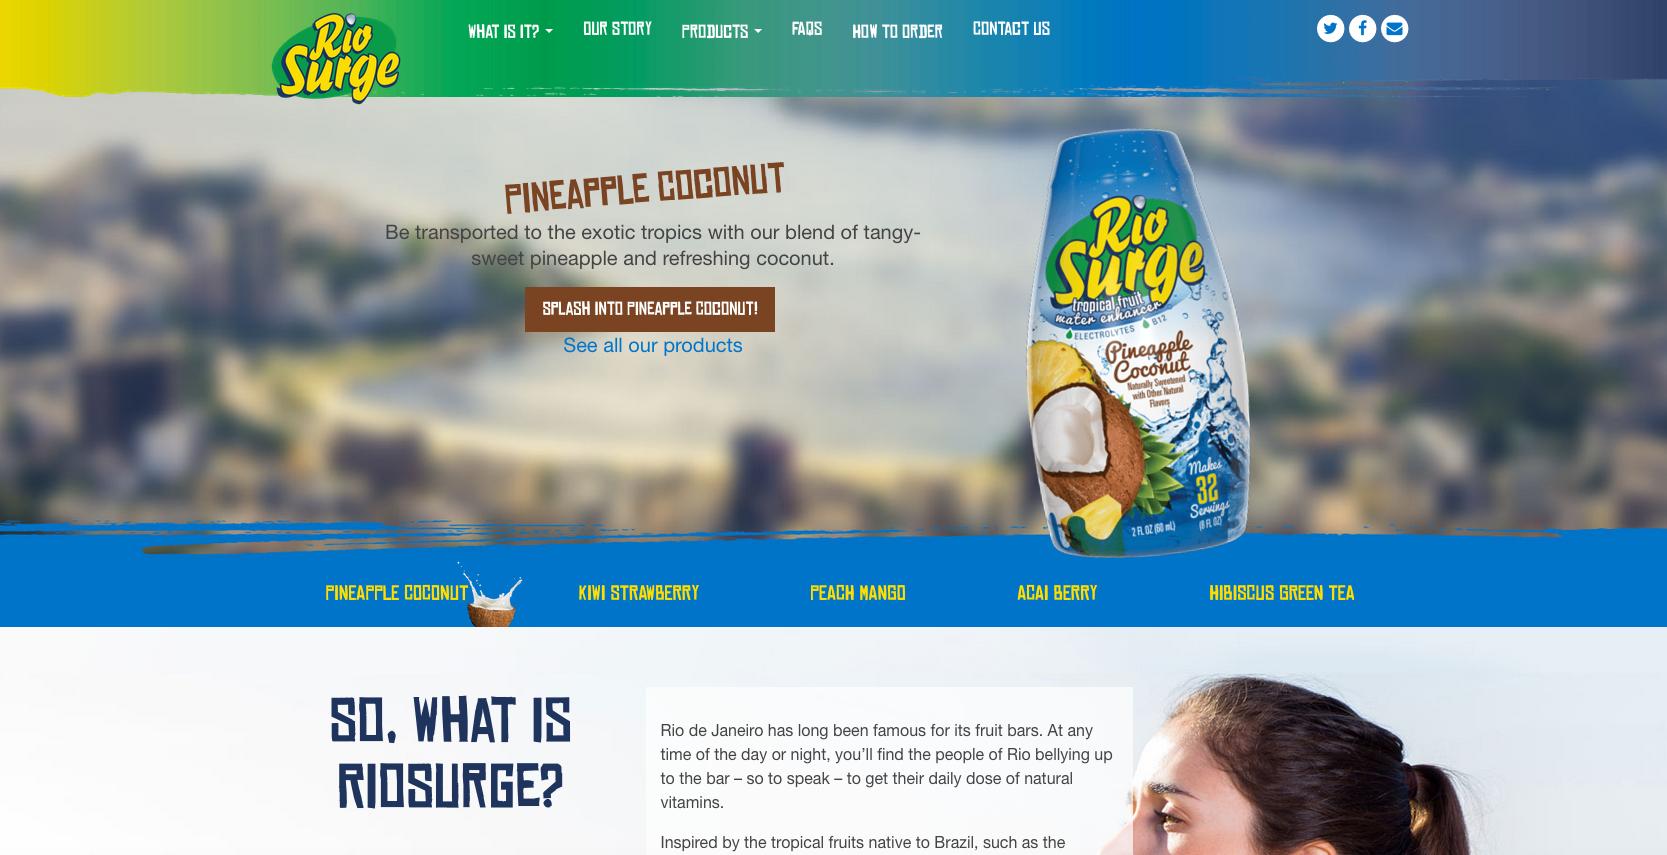 Black Bear Design Joins Forces with RioSurge to Launch New Web Design